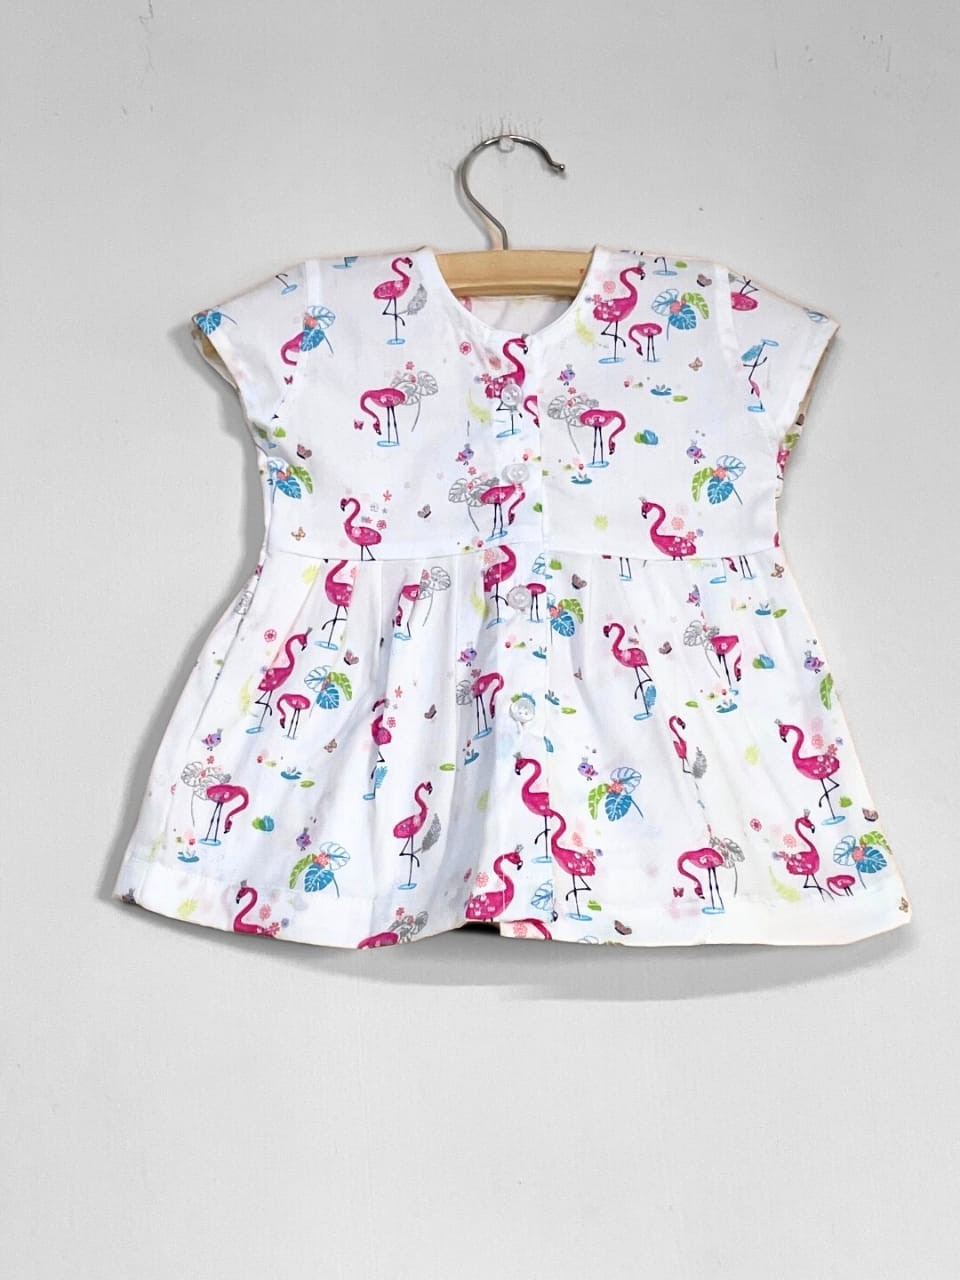 Flamingo Birds Printed Cute A-line Frock for Kids